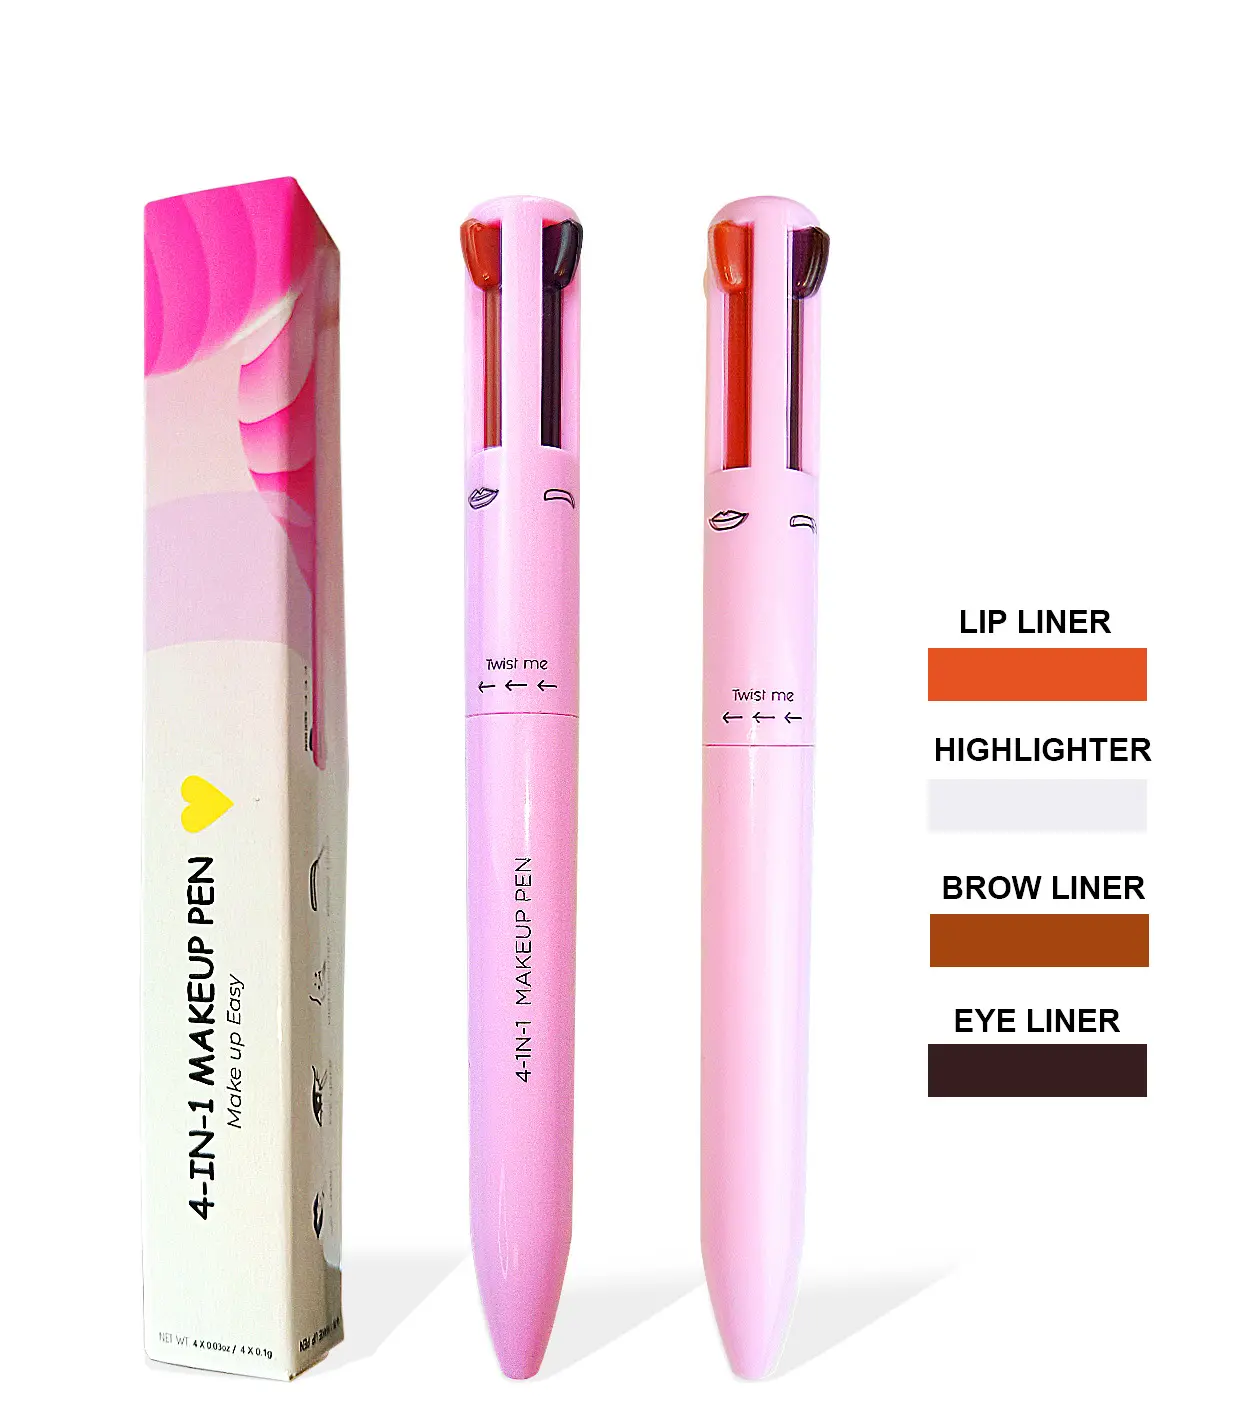 Custom private label Versatile Touch Up 4-in-1 Makeup Multicolor Eyebrow Pencil Eyeliner Highlight Lip Liner Makeup Pen